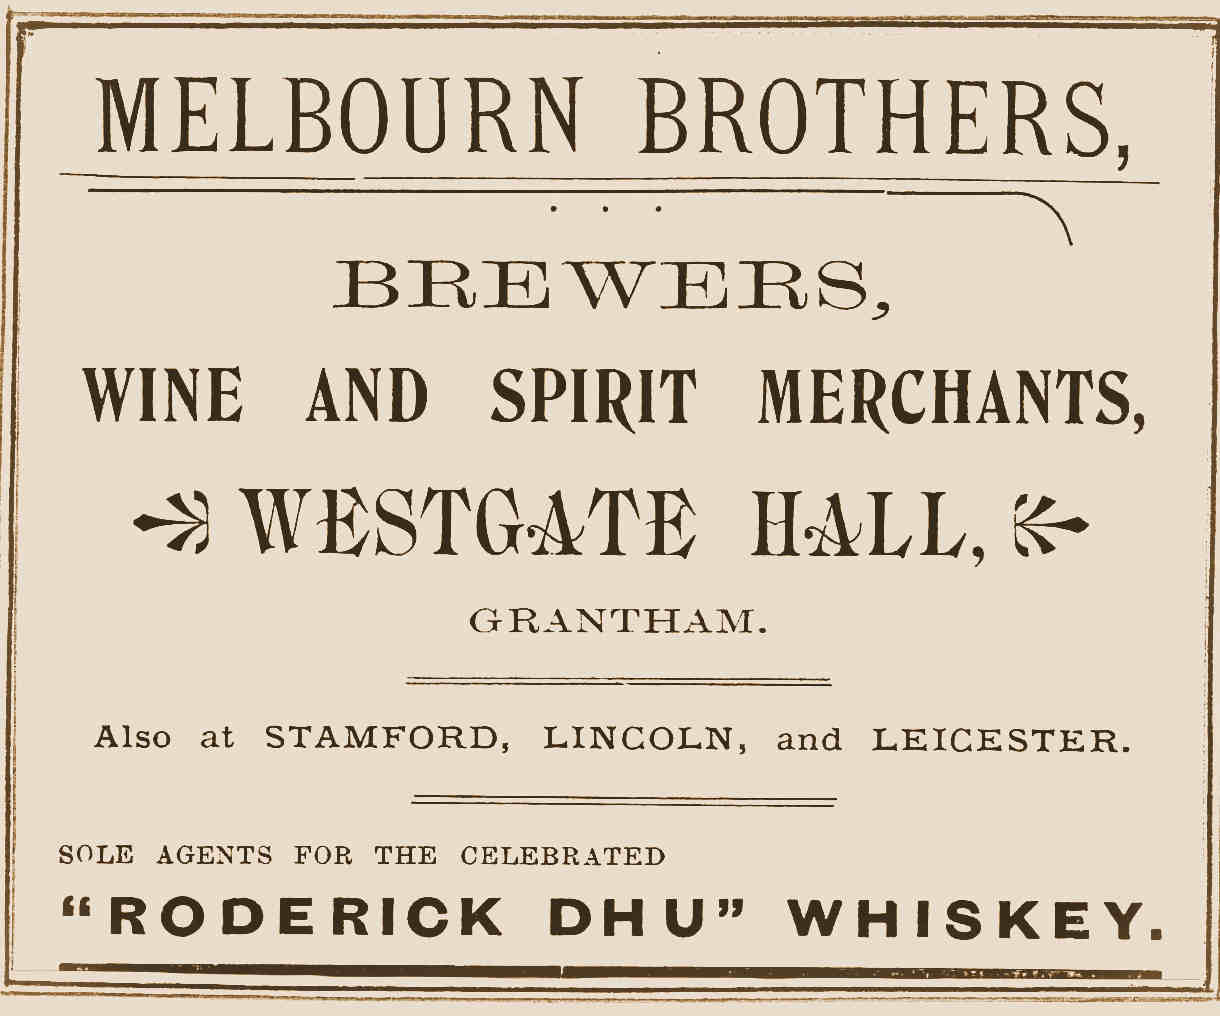 thumb]An advert from 1902